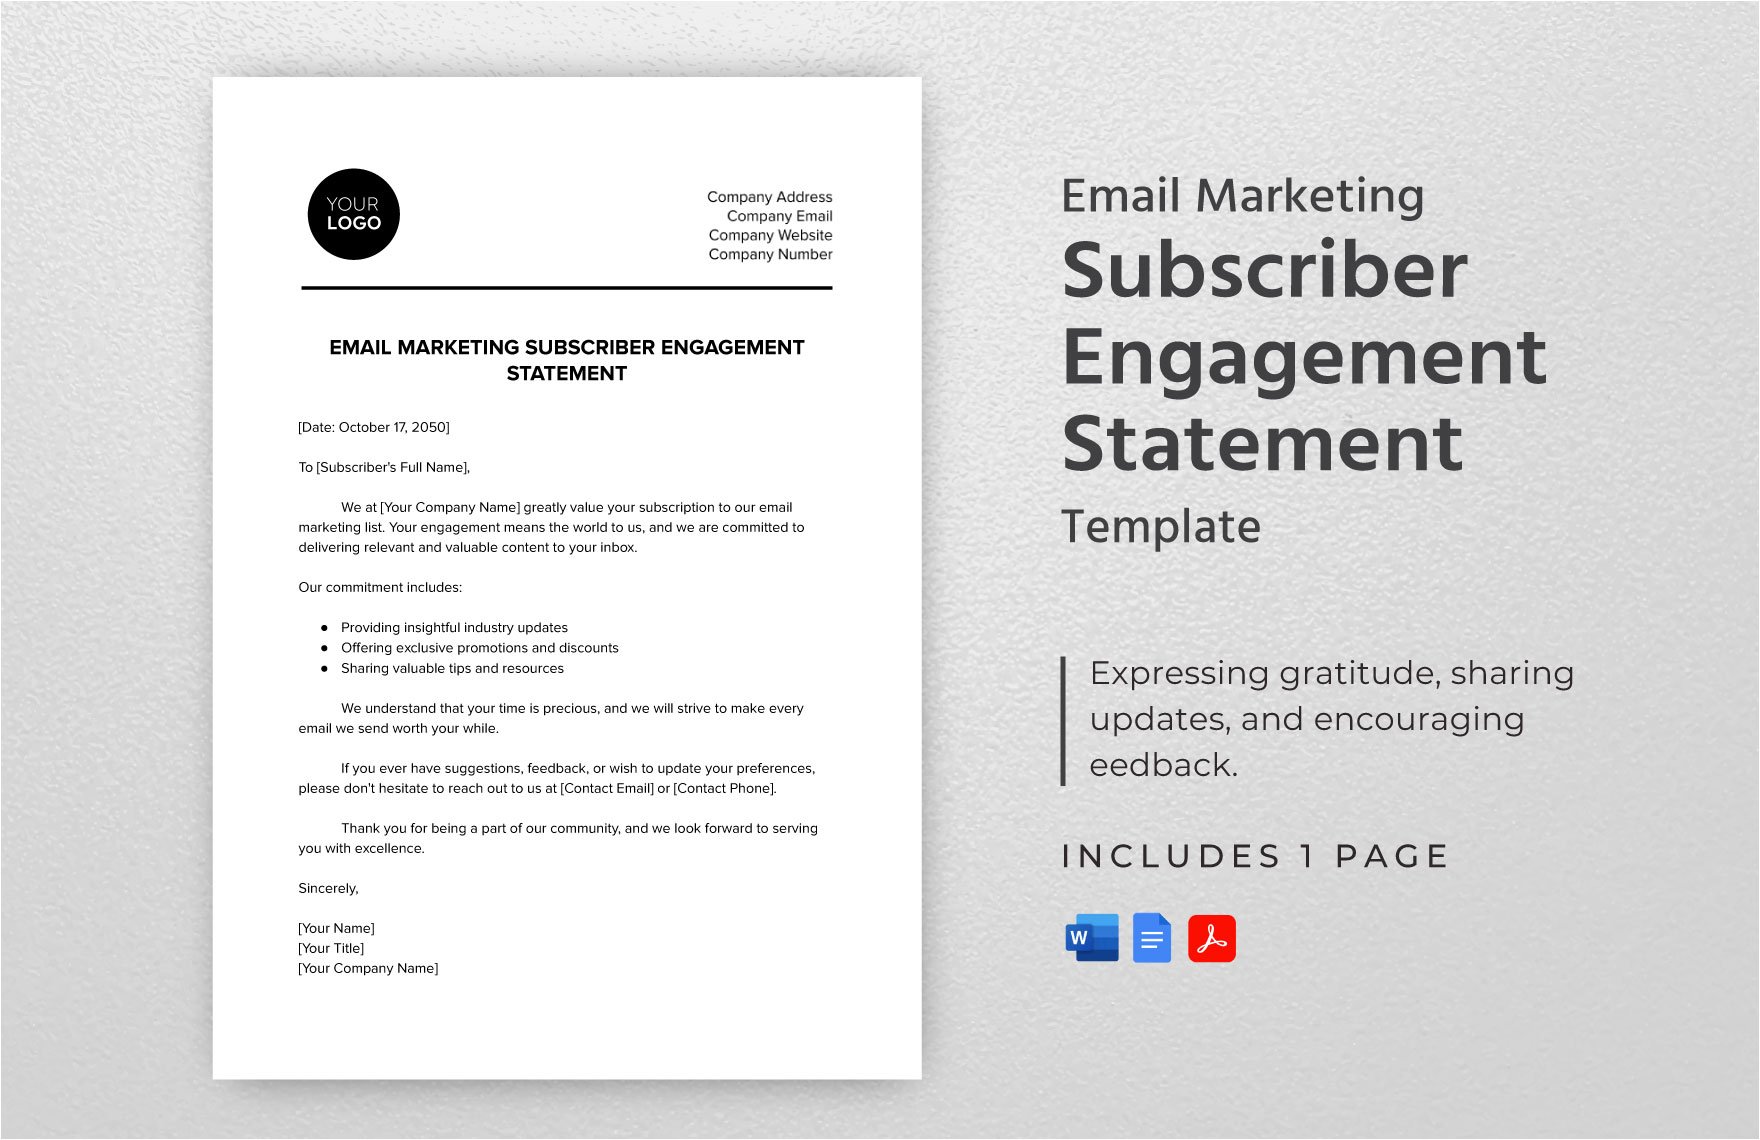 Email Marketing Subscriber Engagement Statement Template